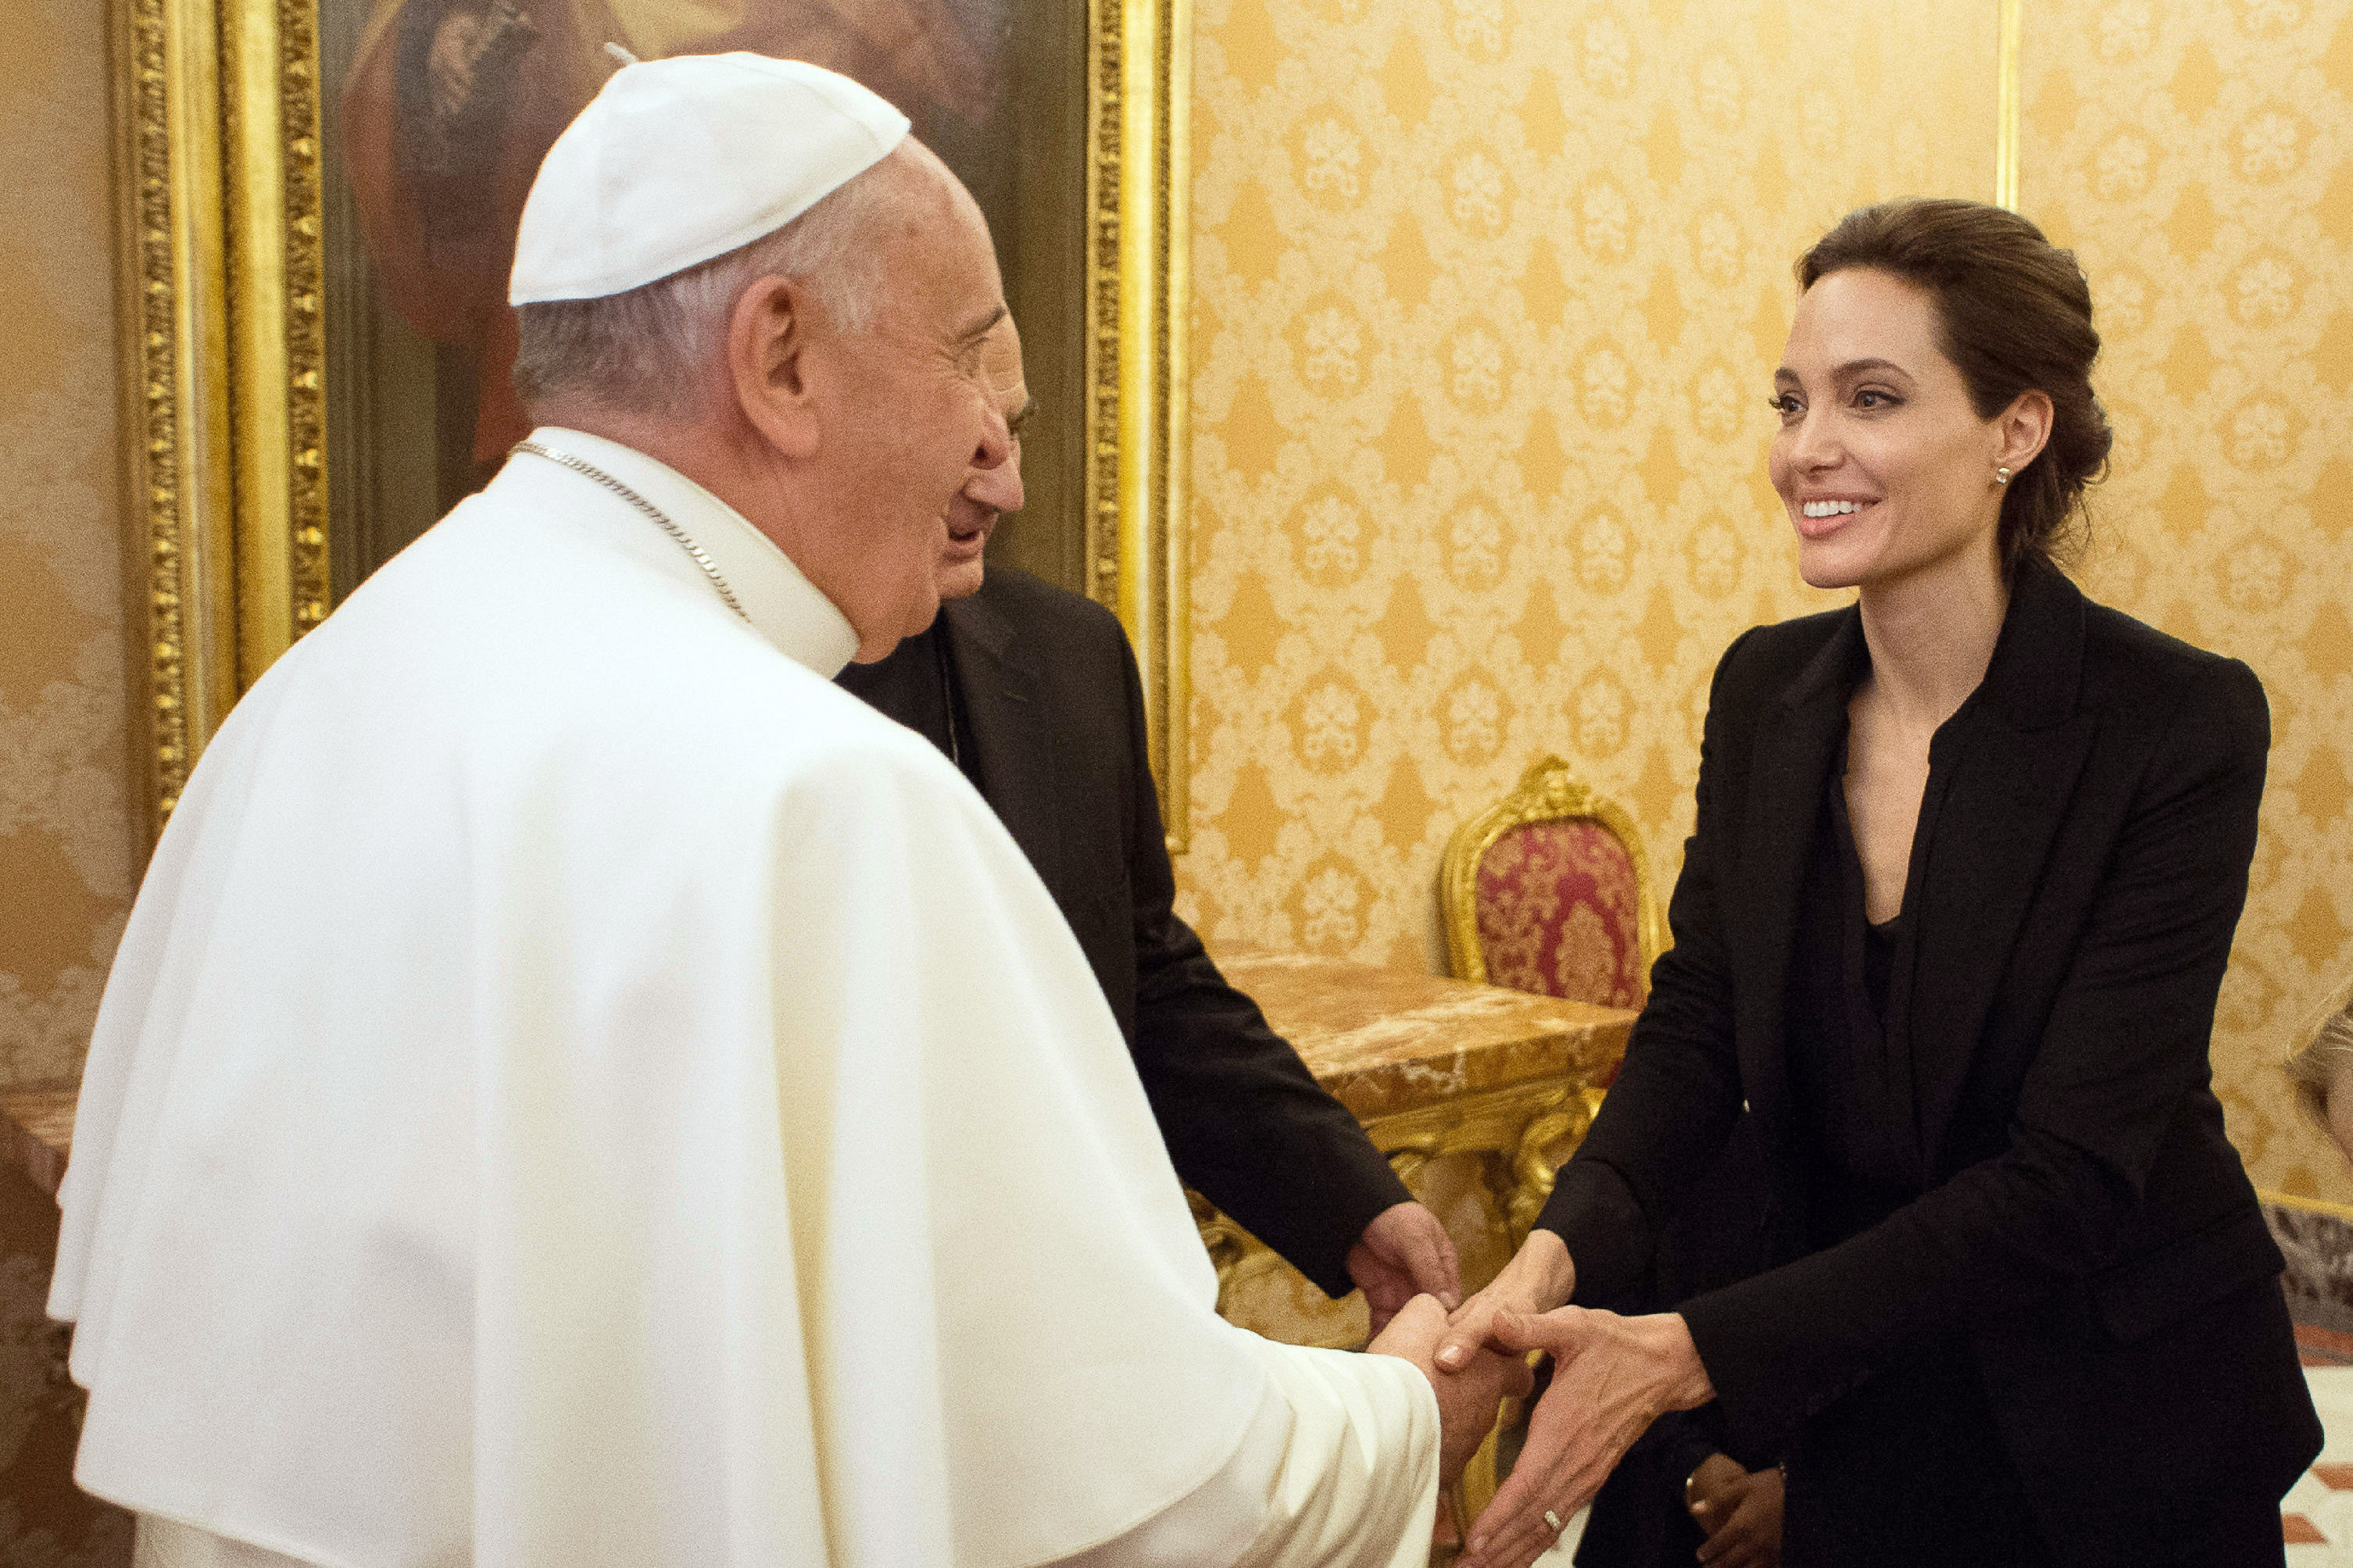 Pope Francis greets Angelina Jolie at the Vatican on Jan. 8, 2015.